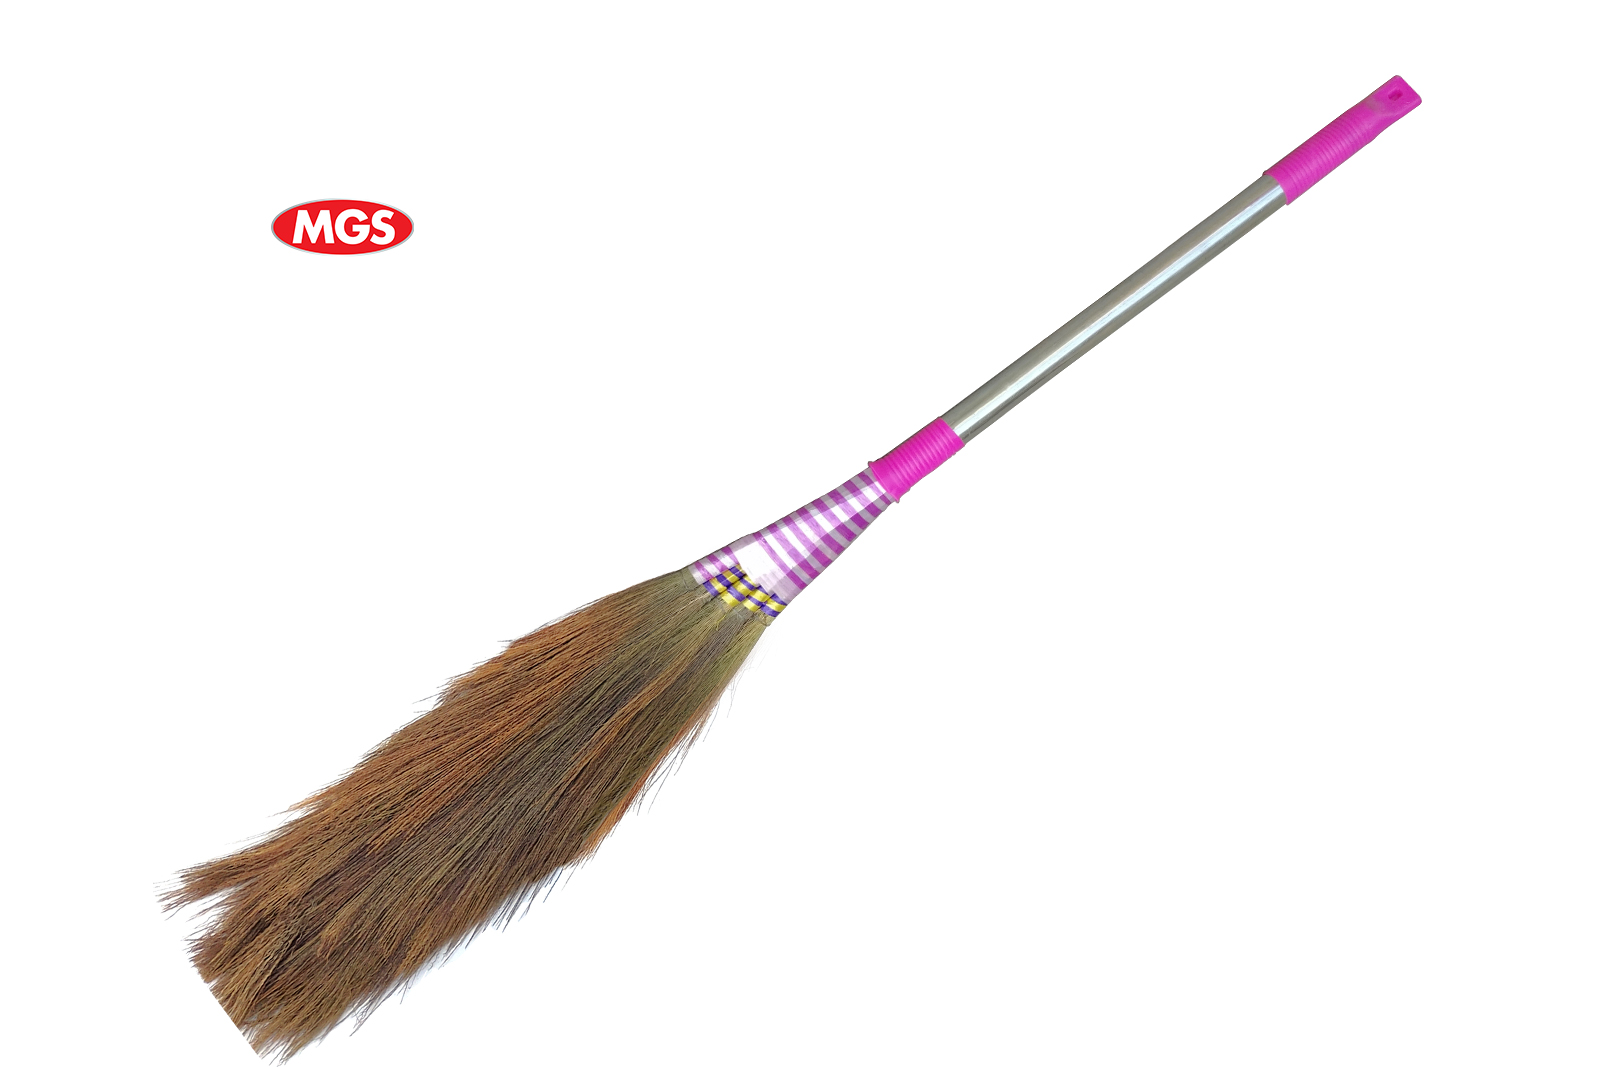 Punchmukhi Wiper Pipe Broom – 46 inches Soft Grass Floor Broom